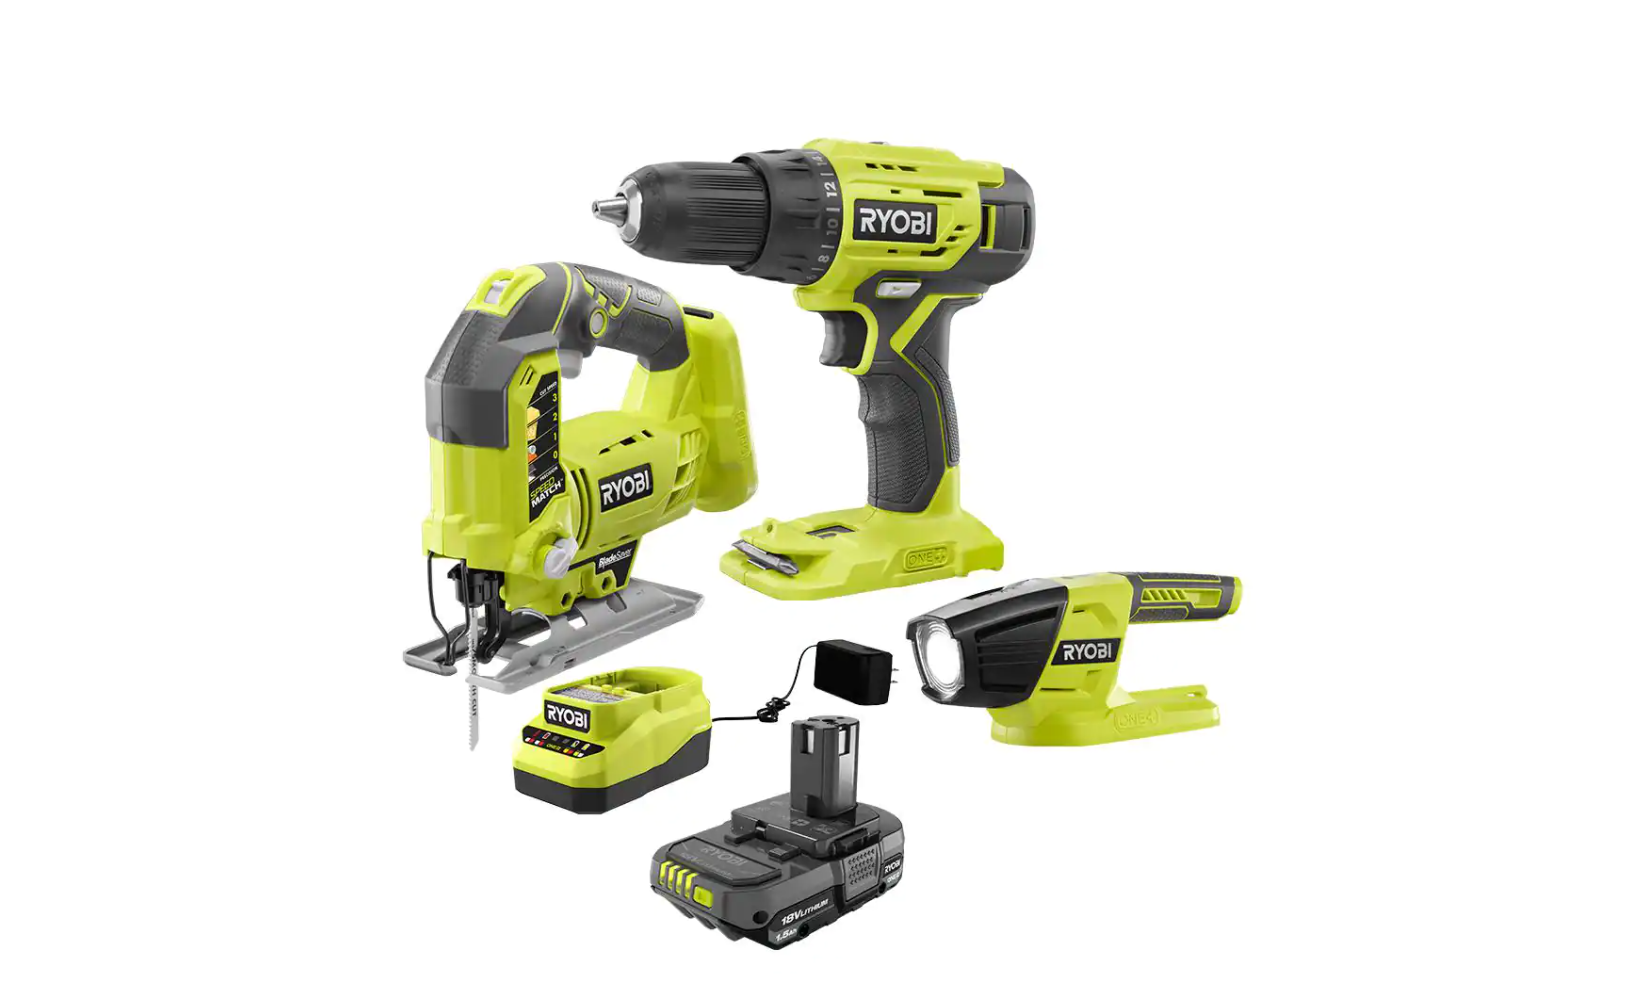 RYOBI ONE+ 18V Cordless 3-Tool Combo Kit with 1.5 Ah Battery and Charger $89